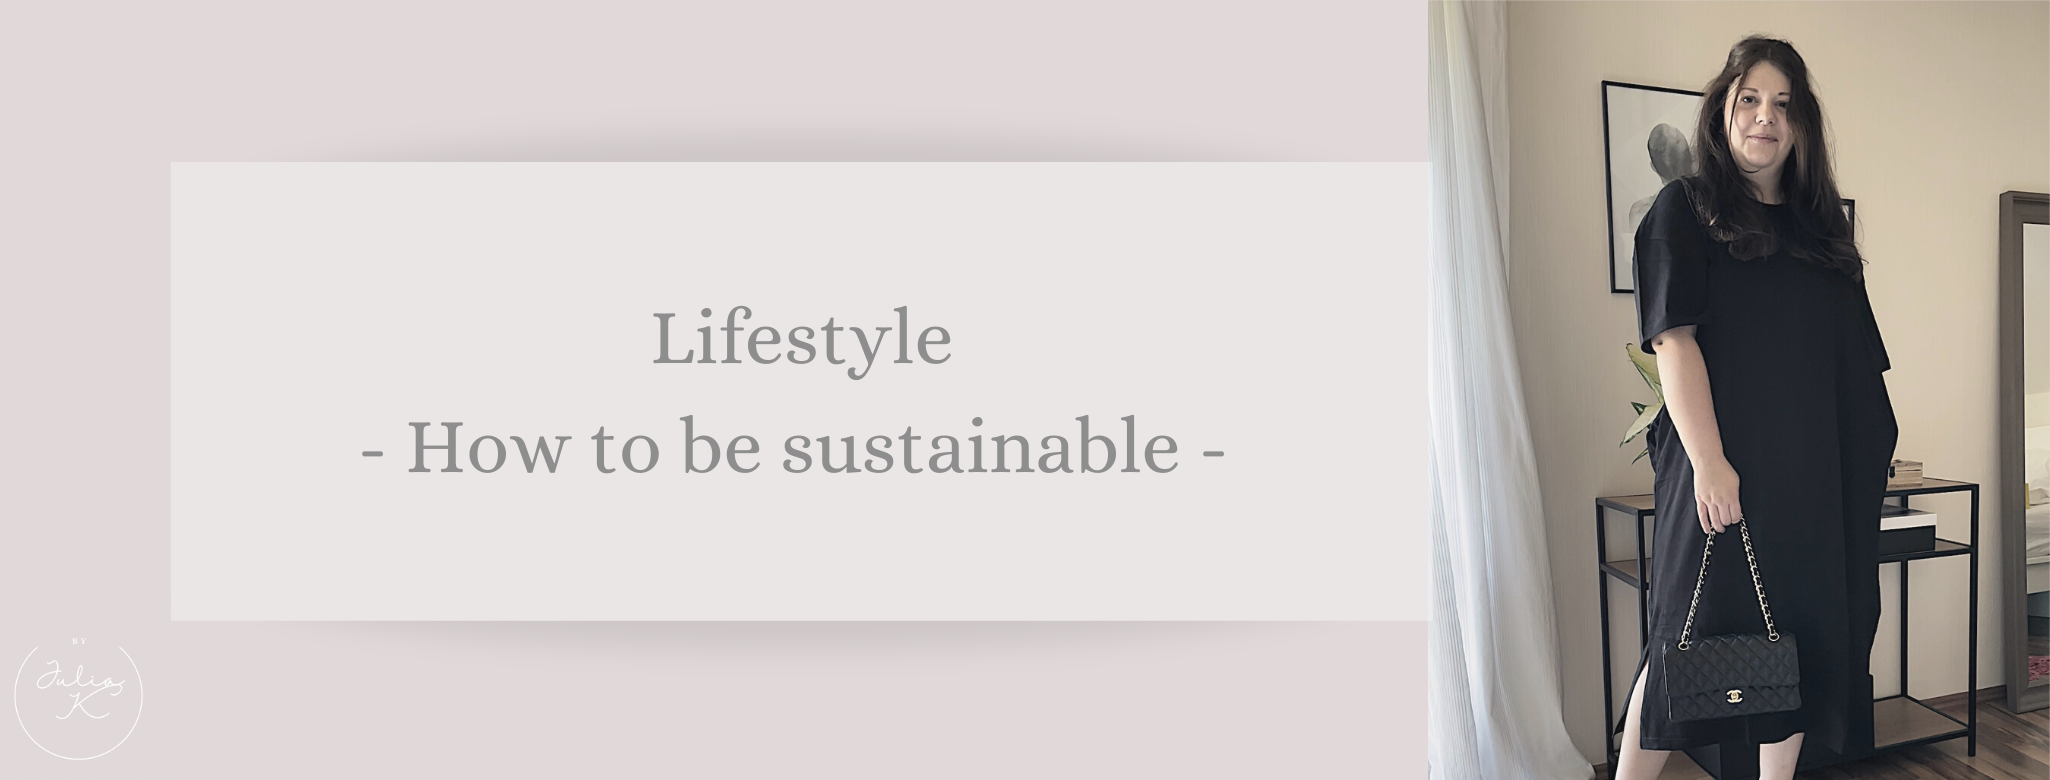 Lifestyle: How to be more sustainable?